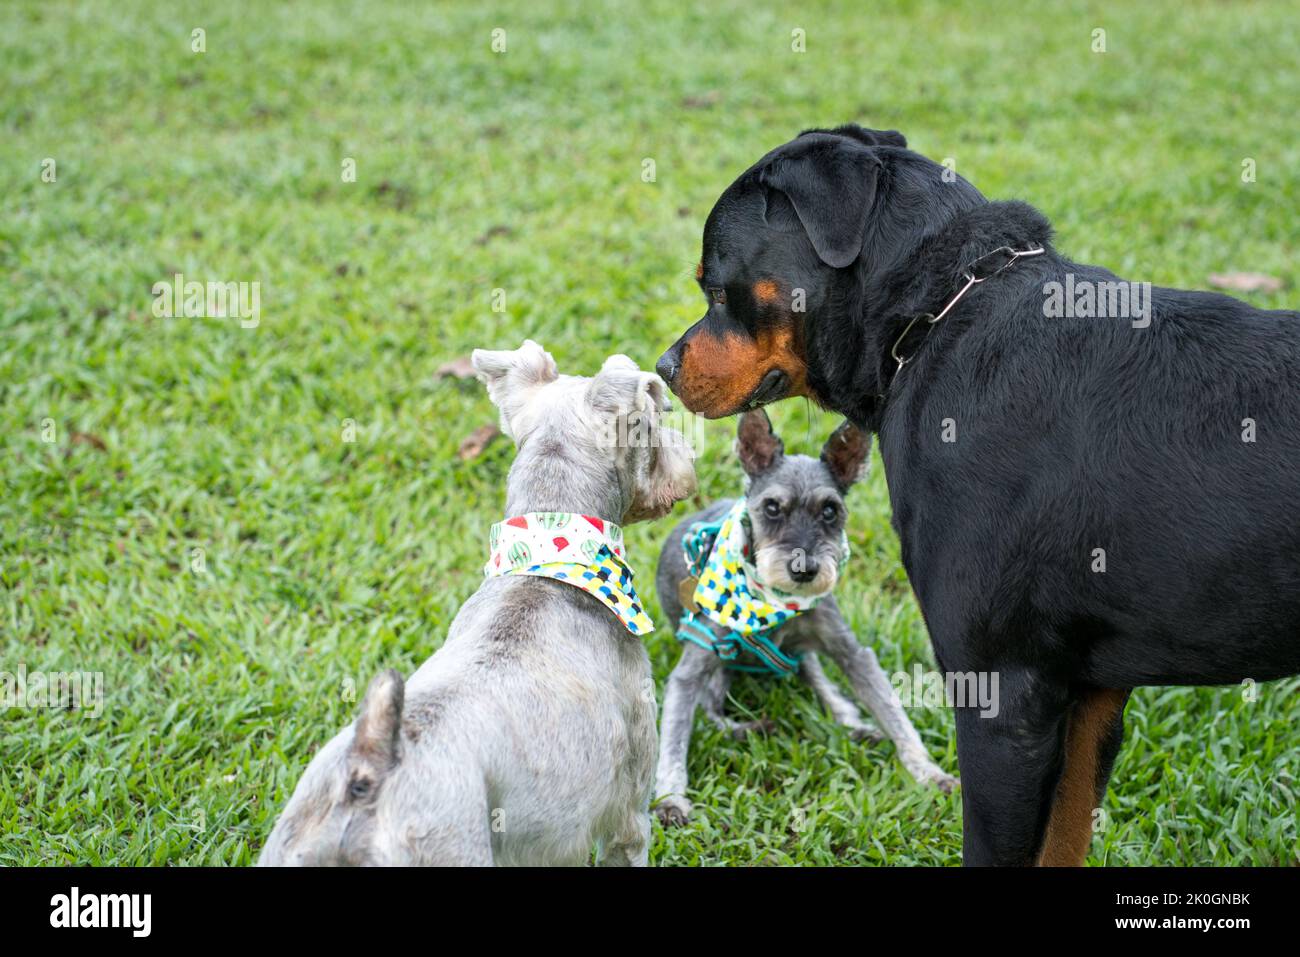 Dogs of different breed playing and socializing. Outdoor in the field. Stock Photo